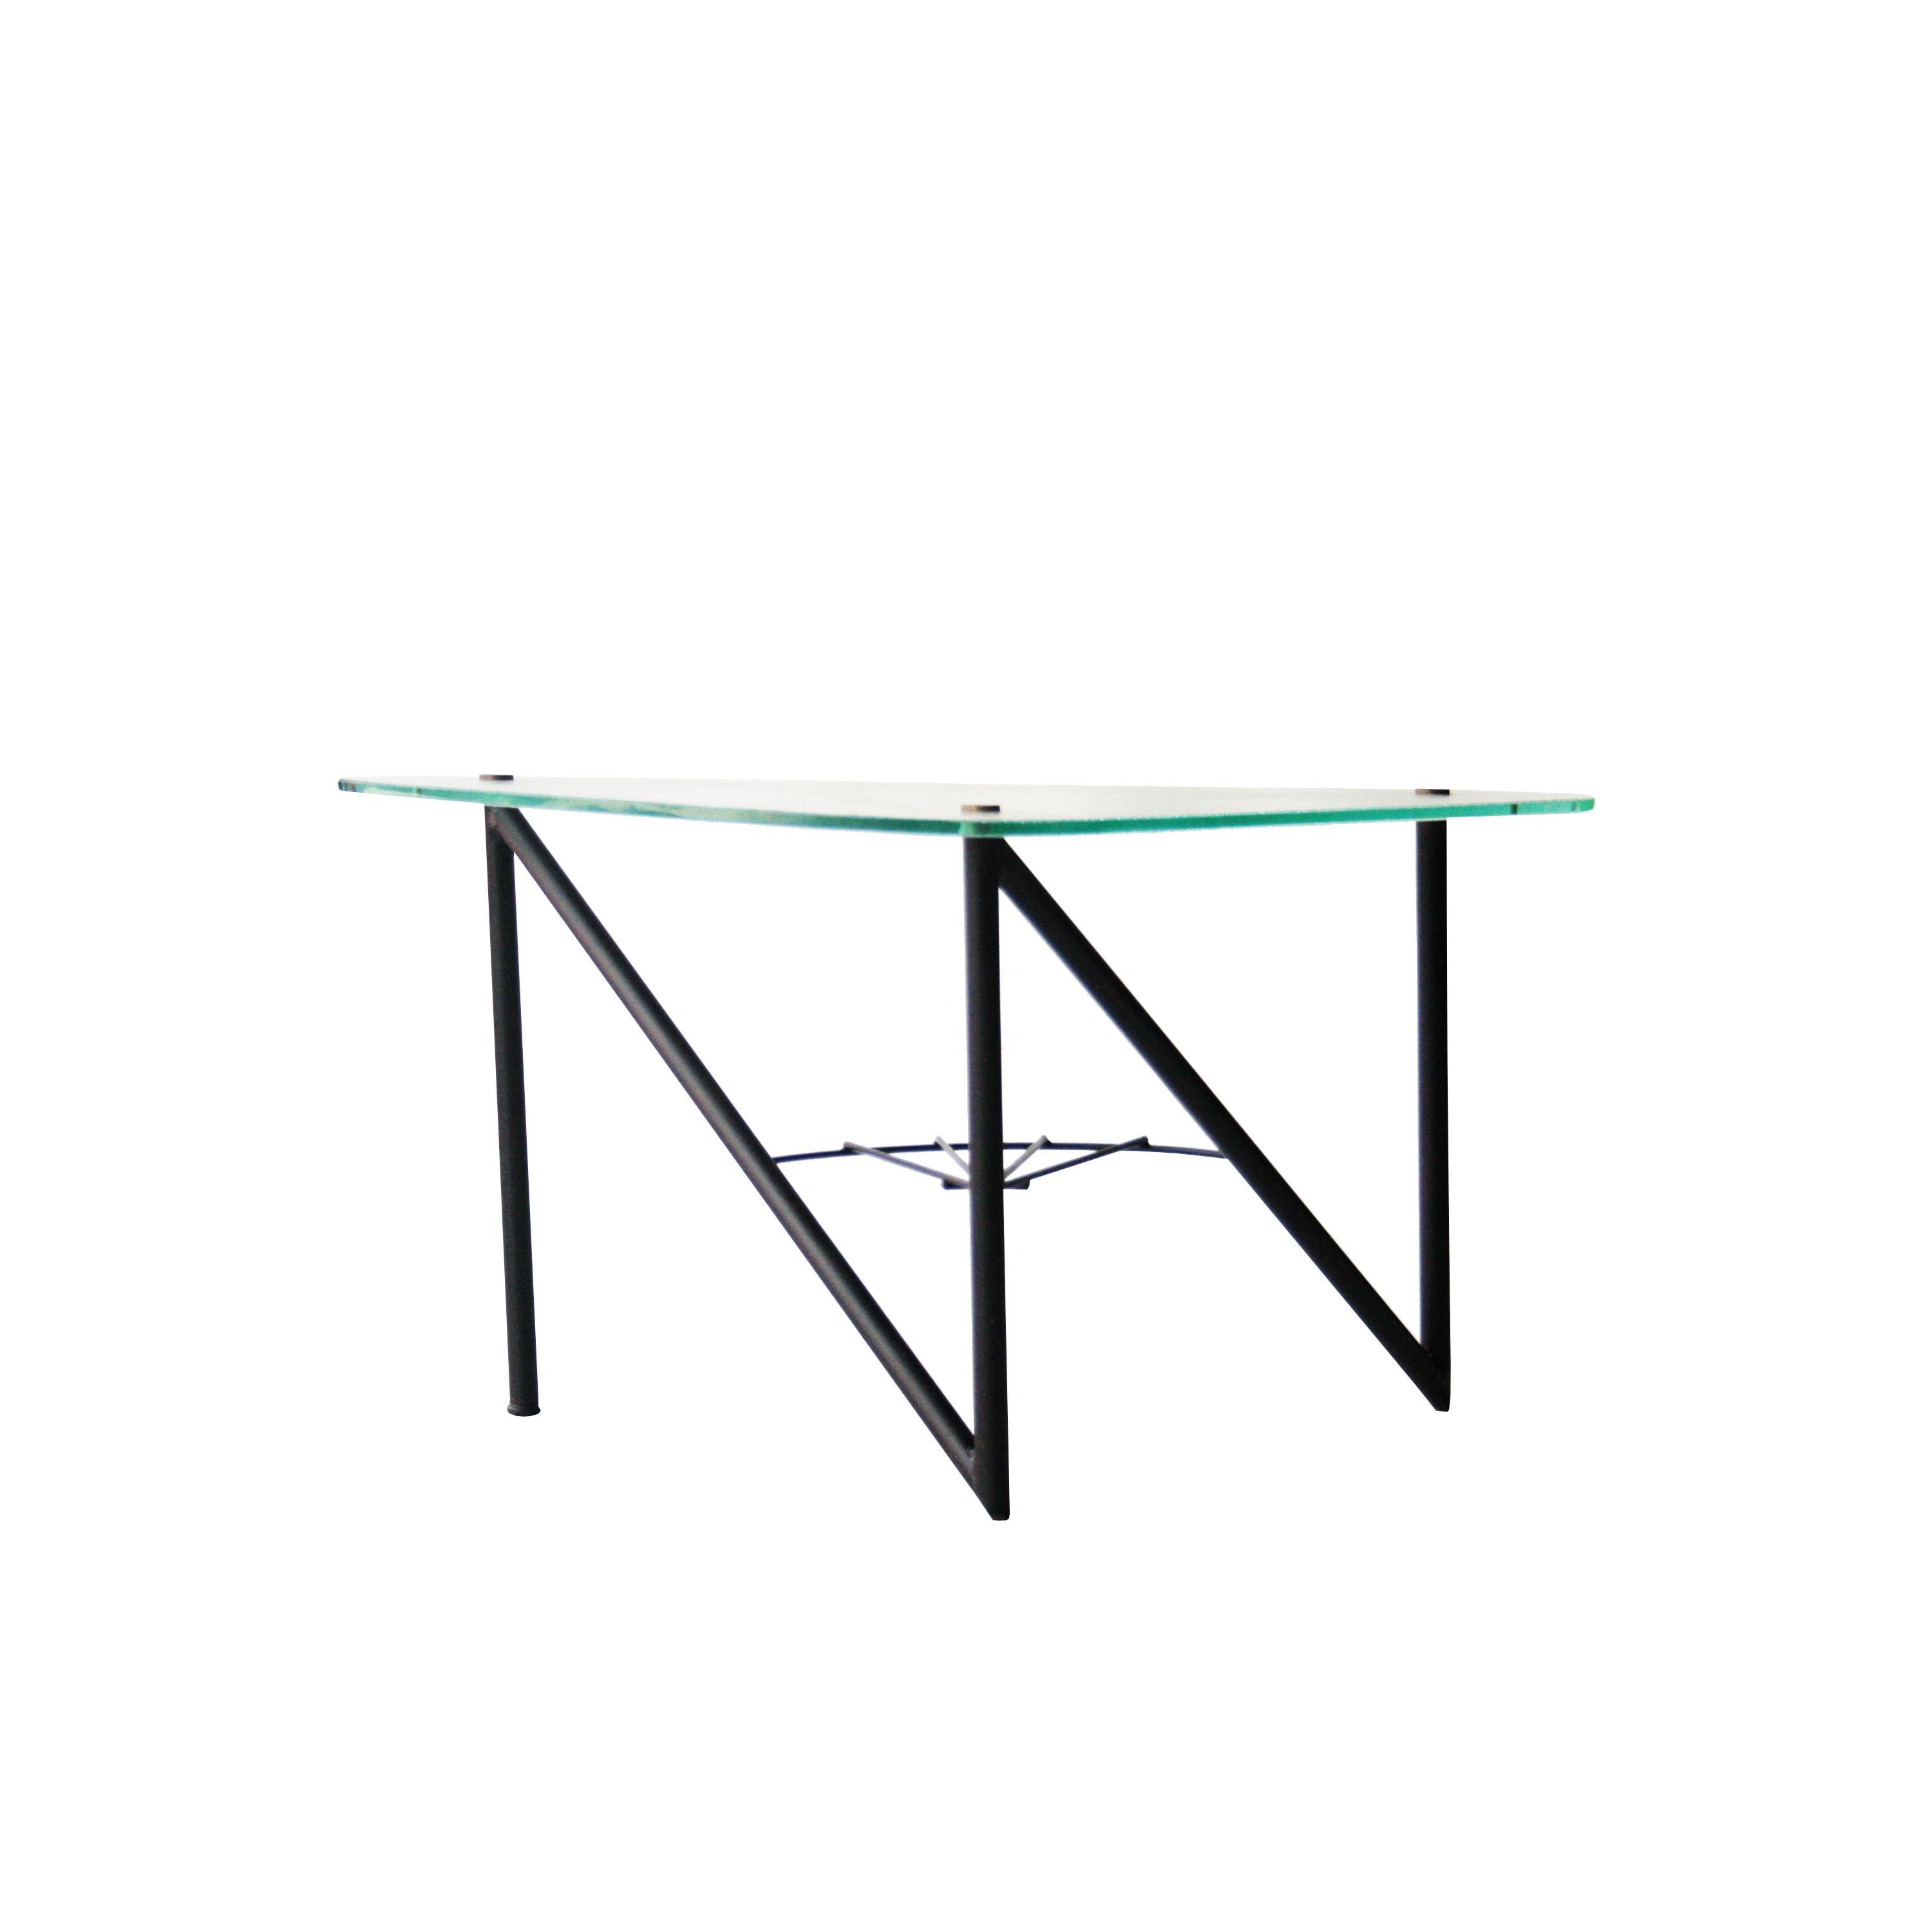 After Louis Sognot Triangular Metal Frossted Glass French Coffee Table, 1950 For Sale 1